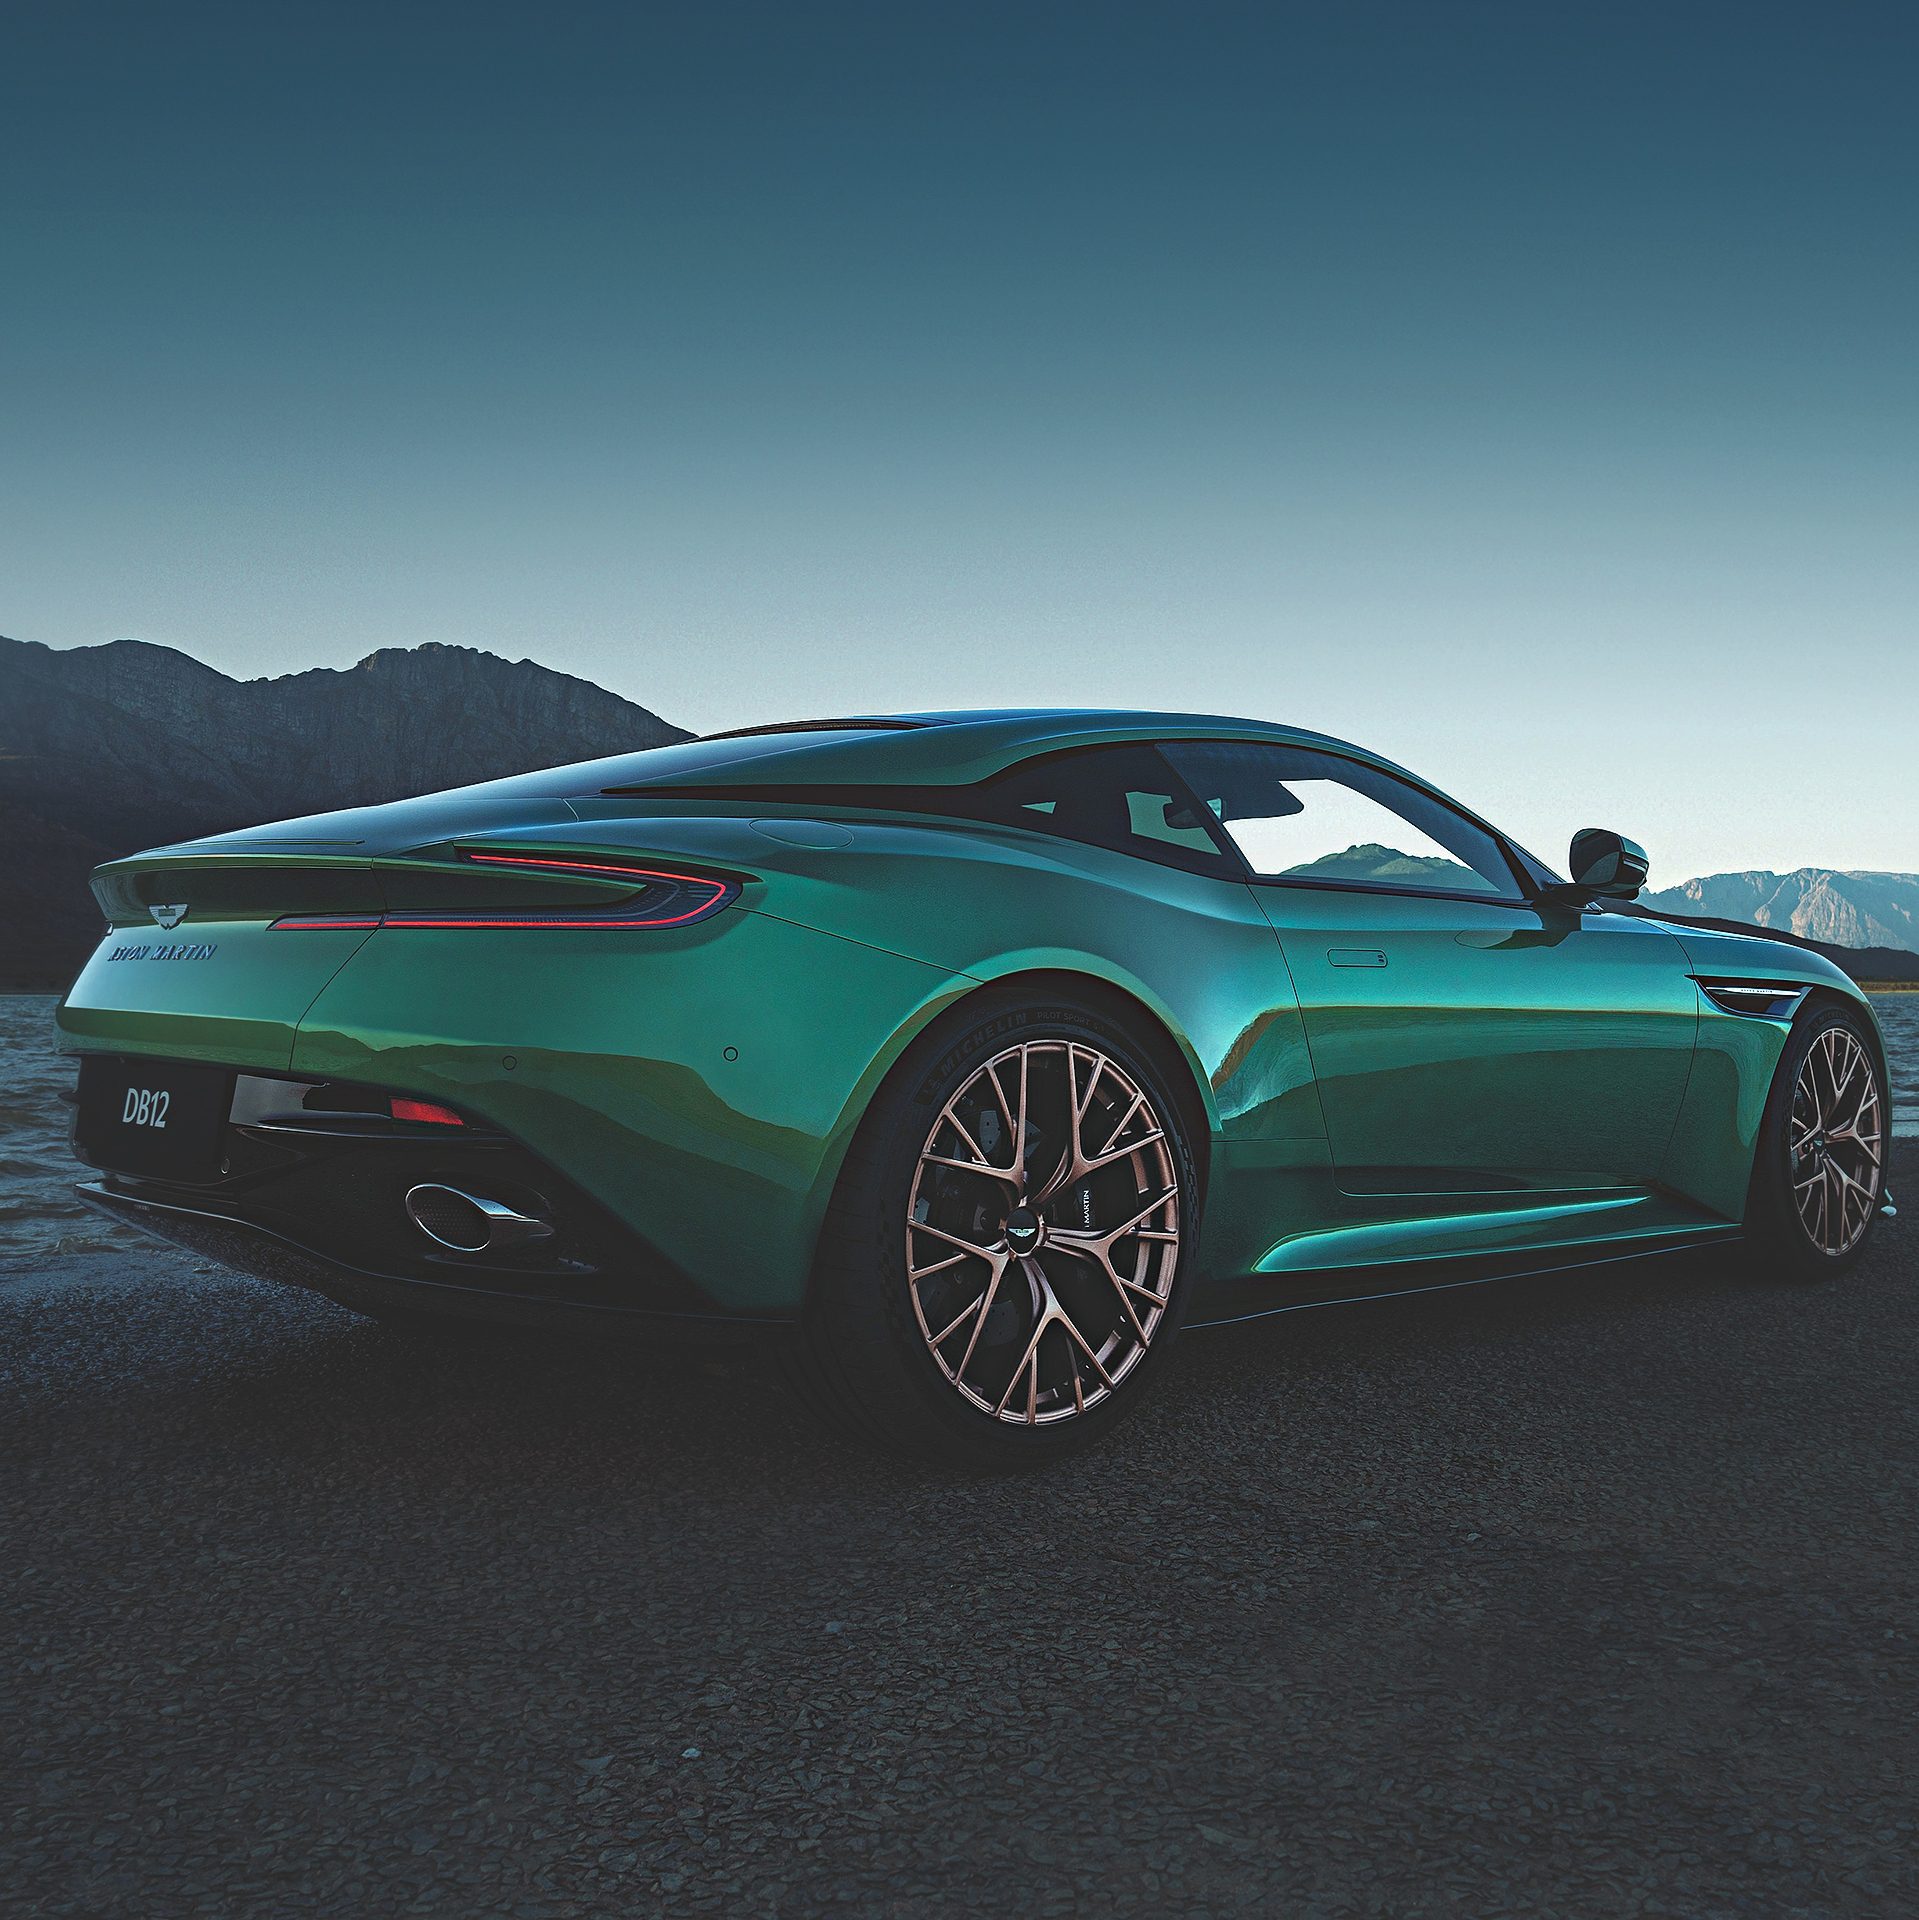 ASTON MARTIN UNVEILS DB12 AT STAR-STUDDED EVENT DURING THE CANNES INTERNATIONAL FILM FESTIVAL.

